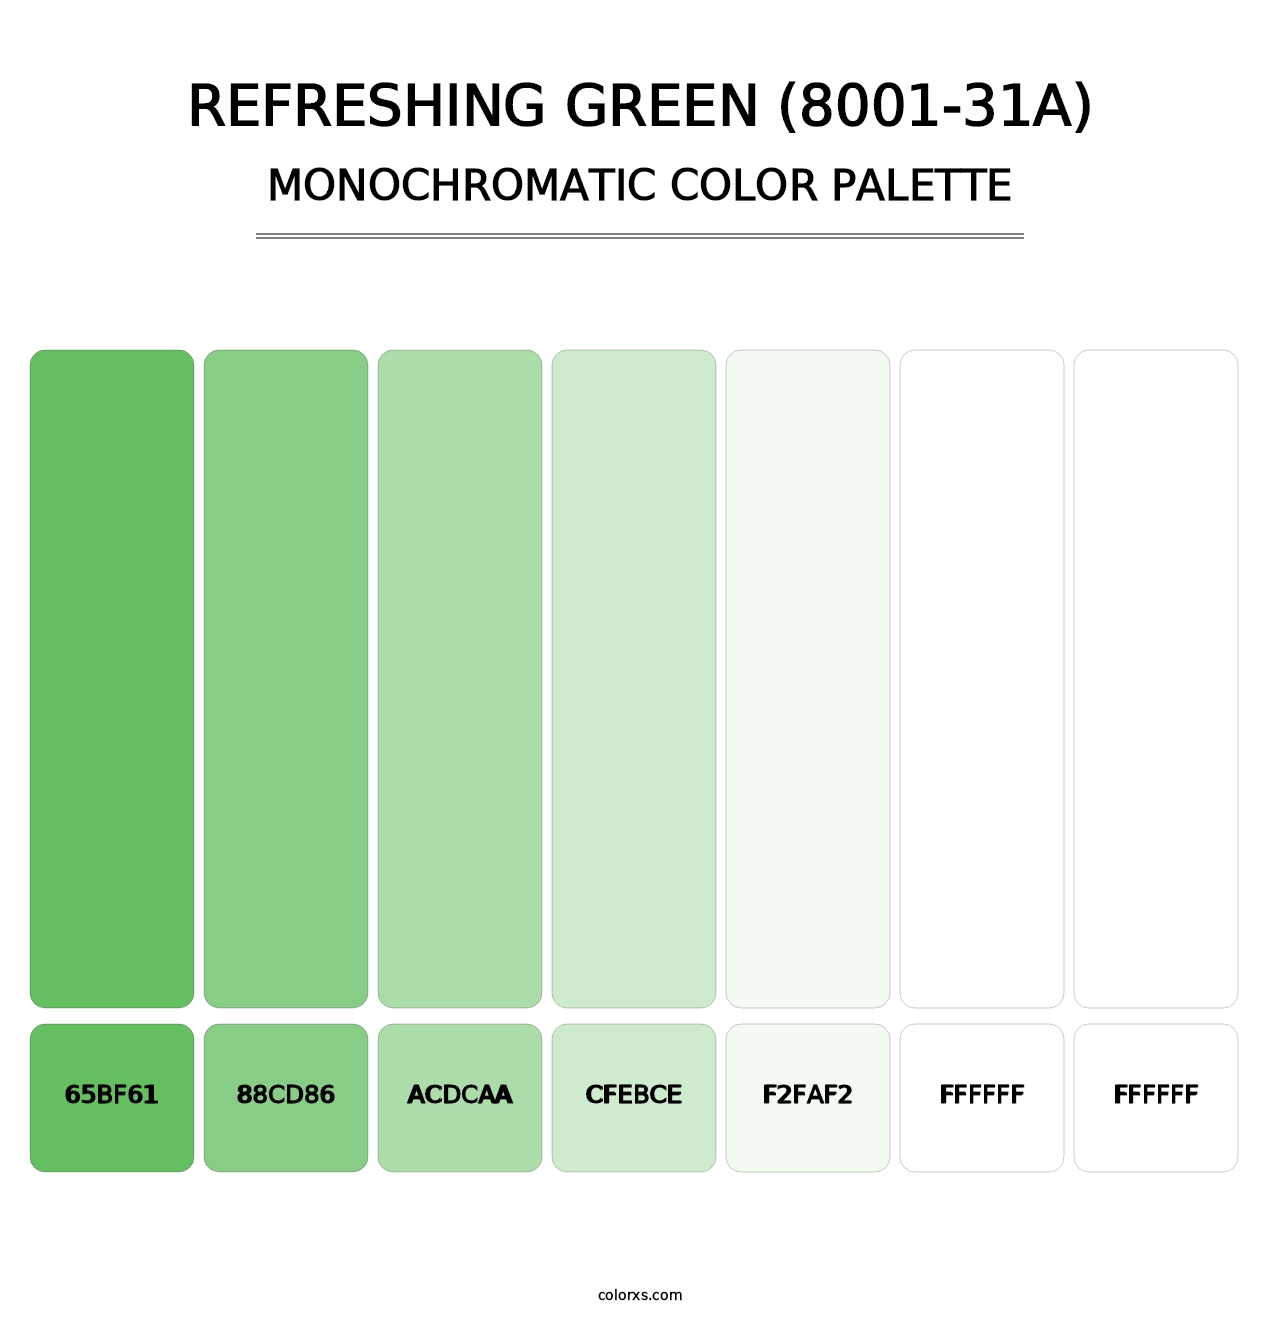 Refreshing Green (8001-31A) - Monochromatic Color Palette